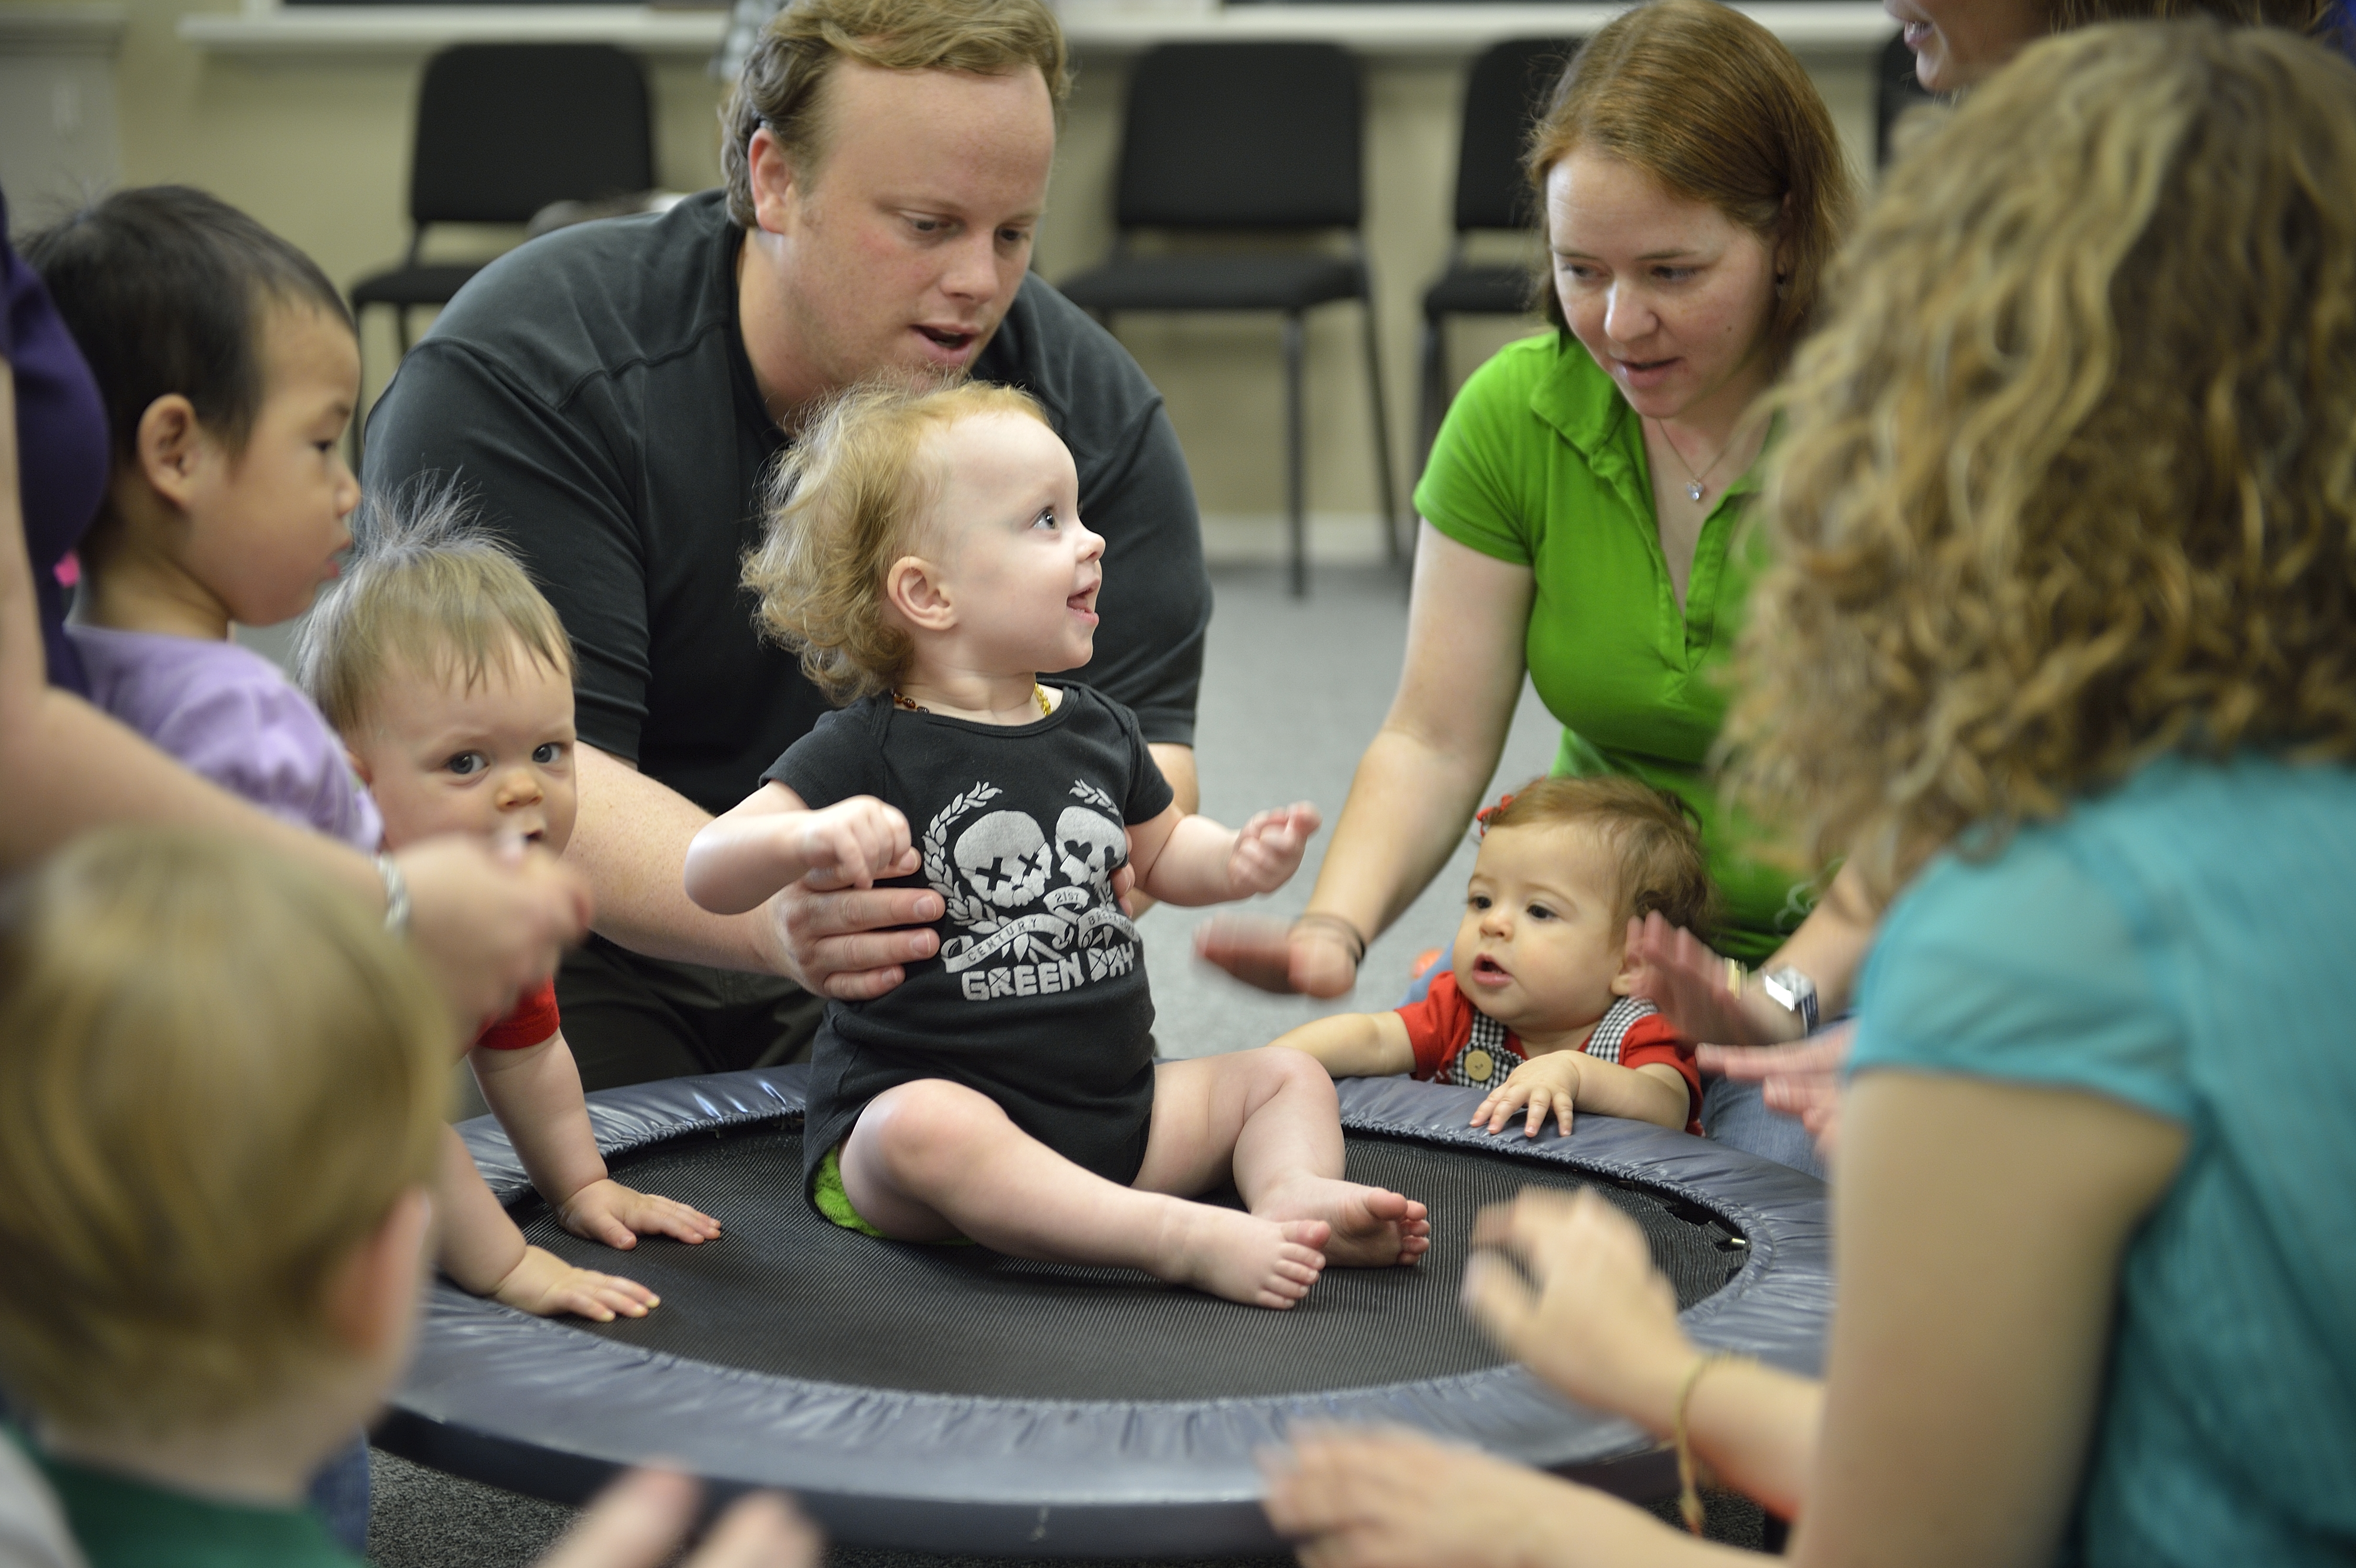 University of North Texas’ Early Childhood Music program offers music classes fo